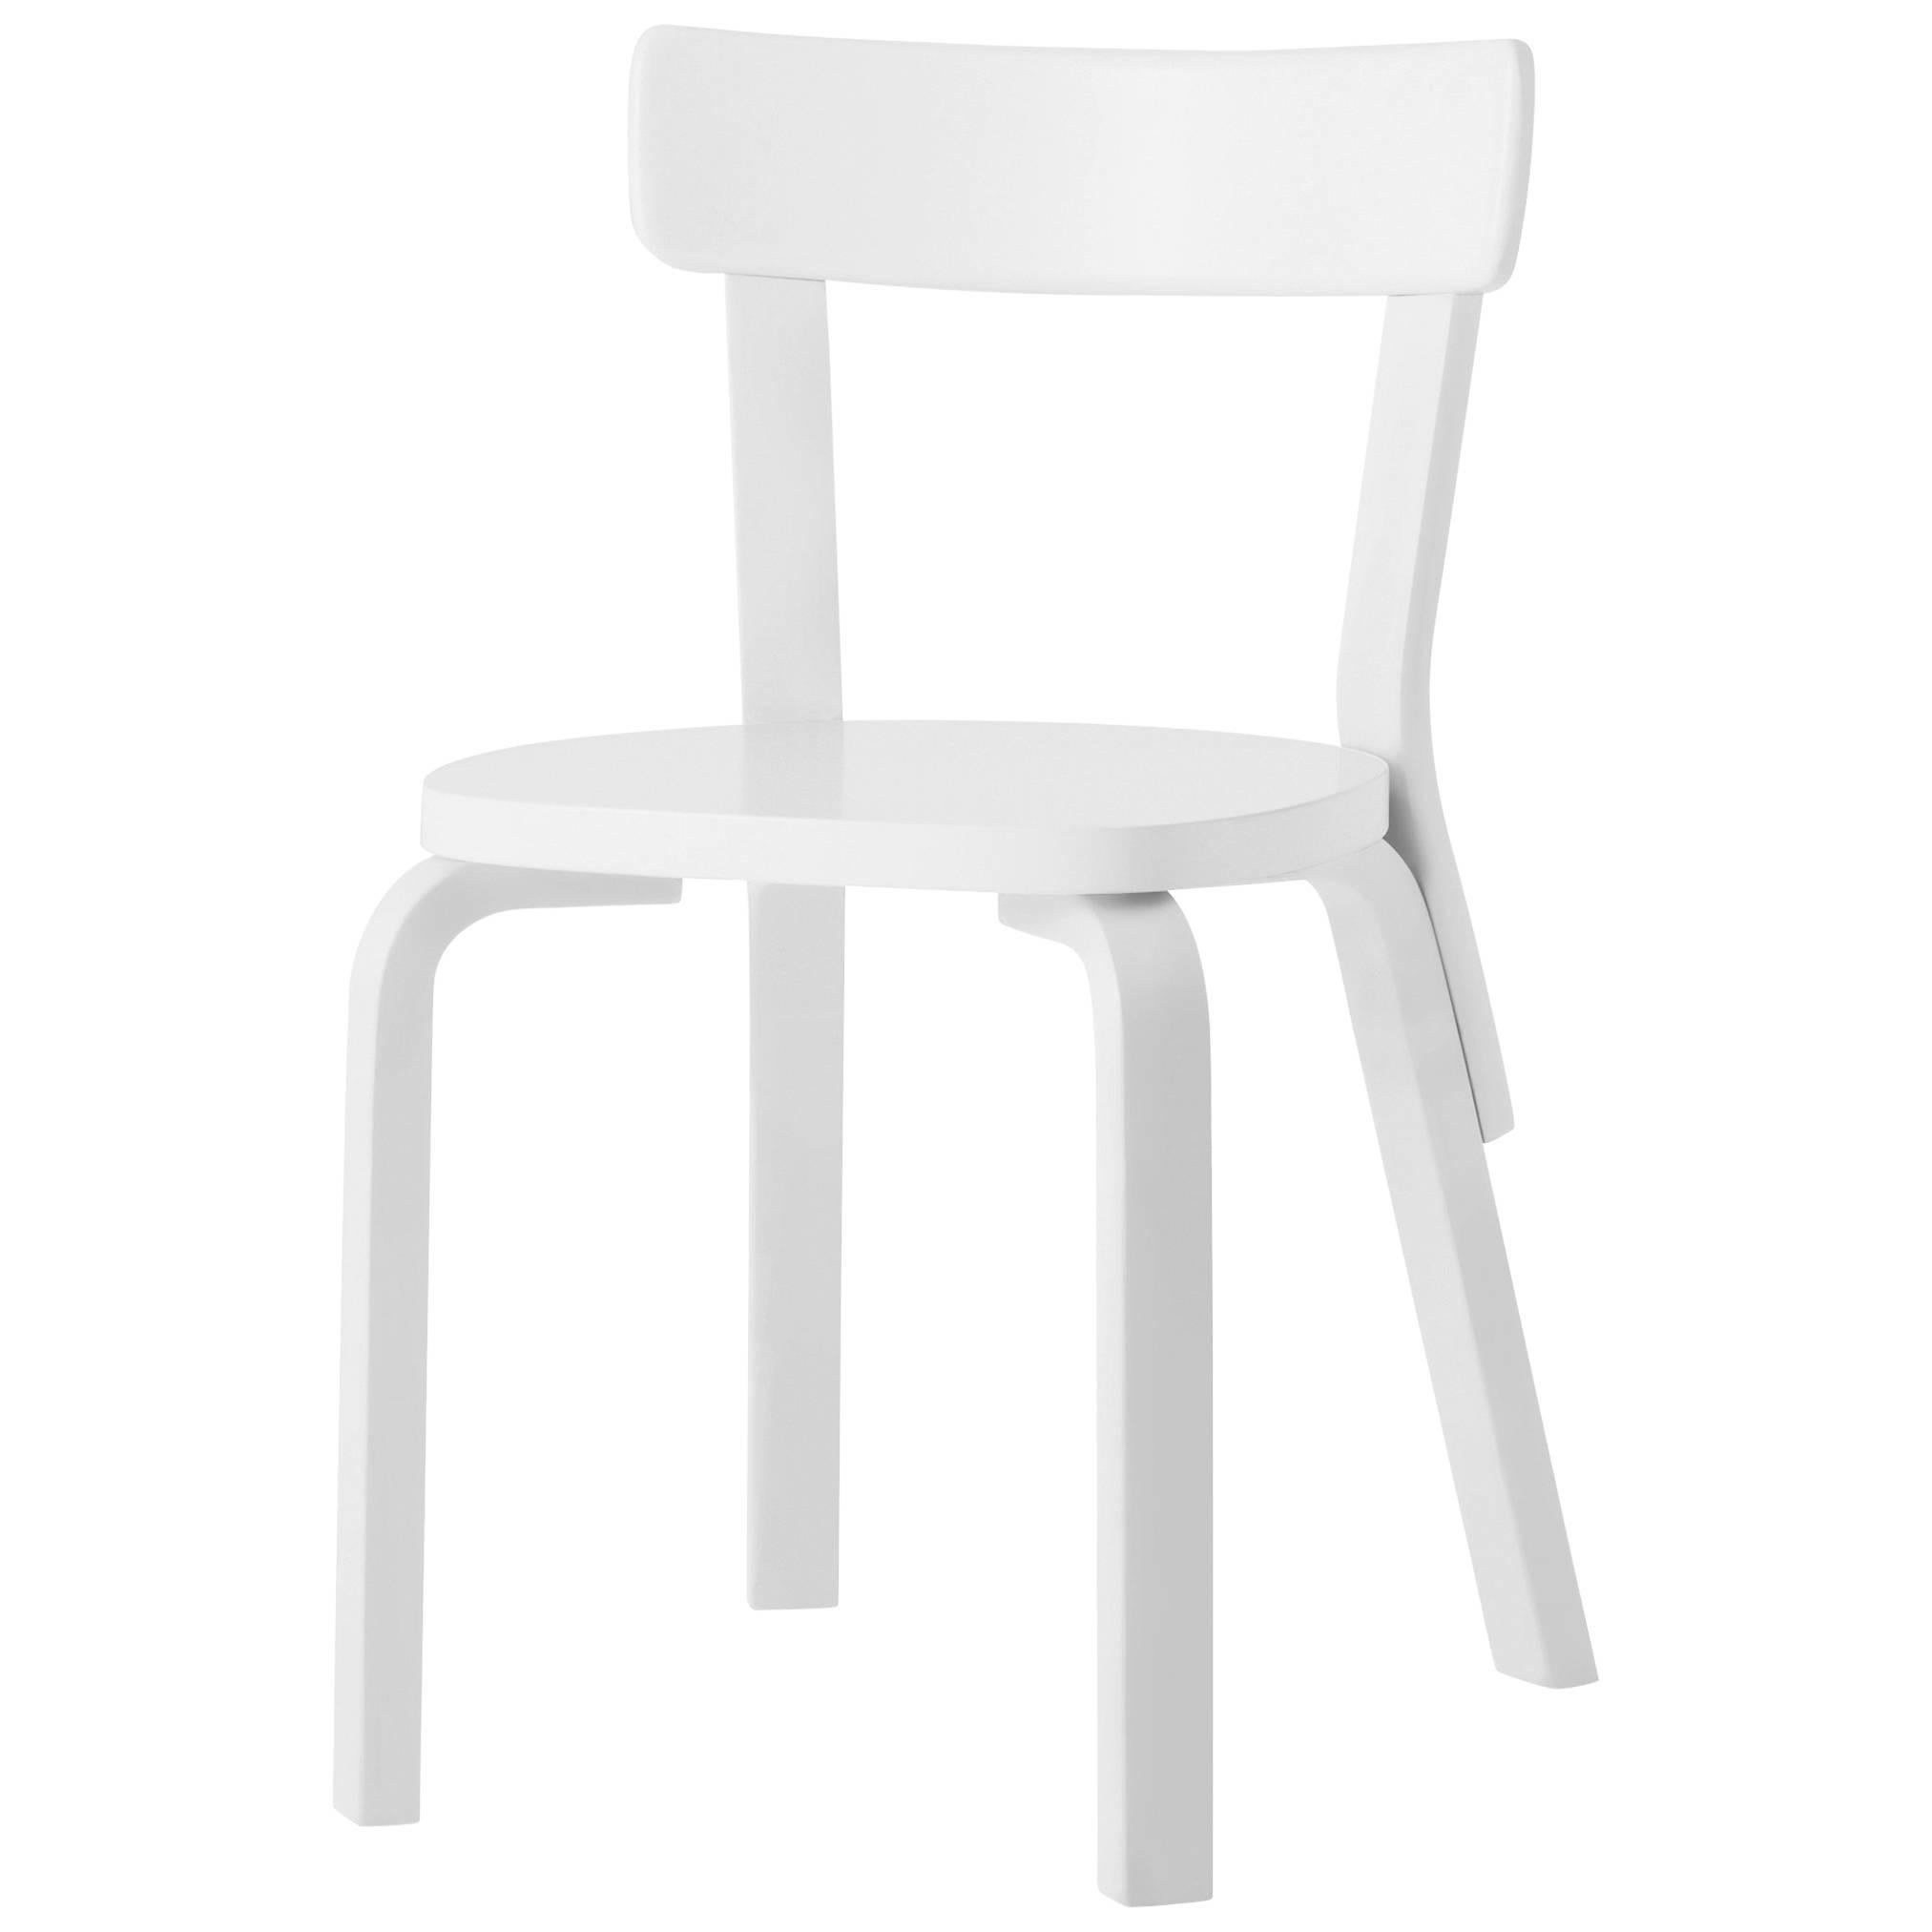 Authentic Chair 69 in Birch with White Lacquer by Alvar Aalto & Artek For Sale